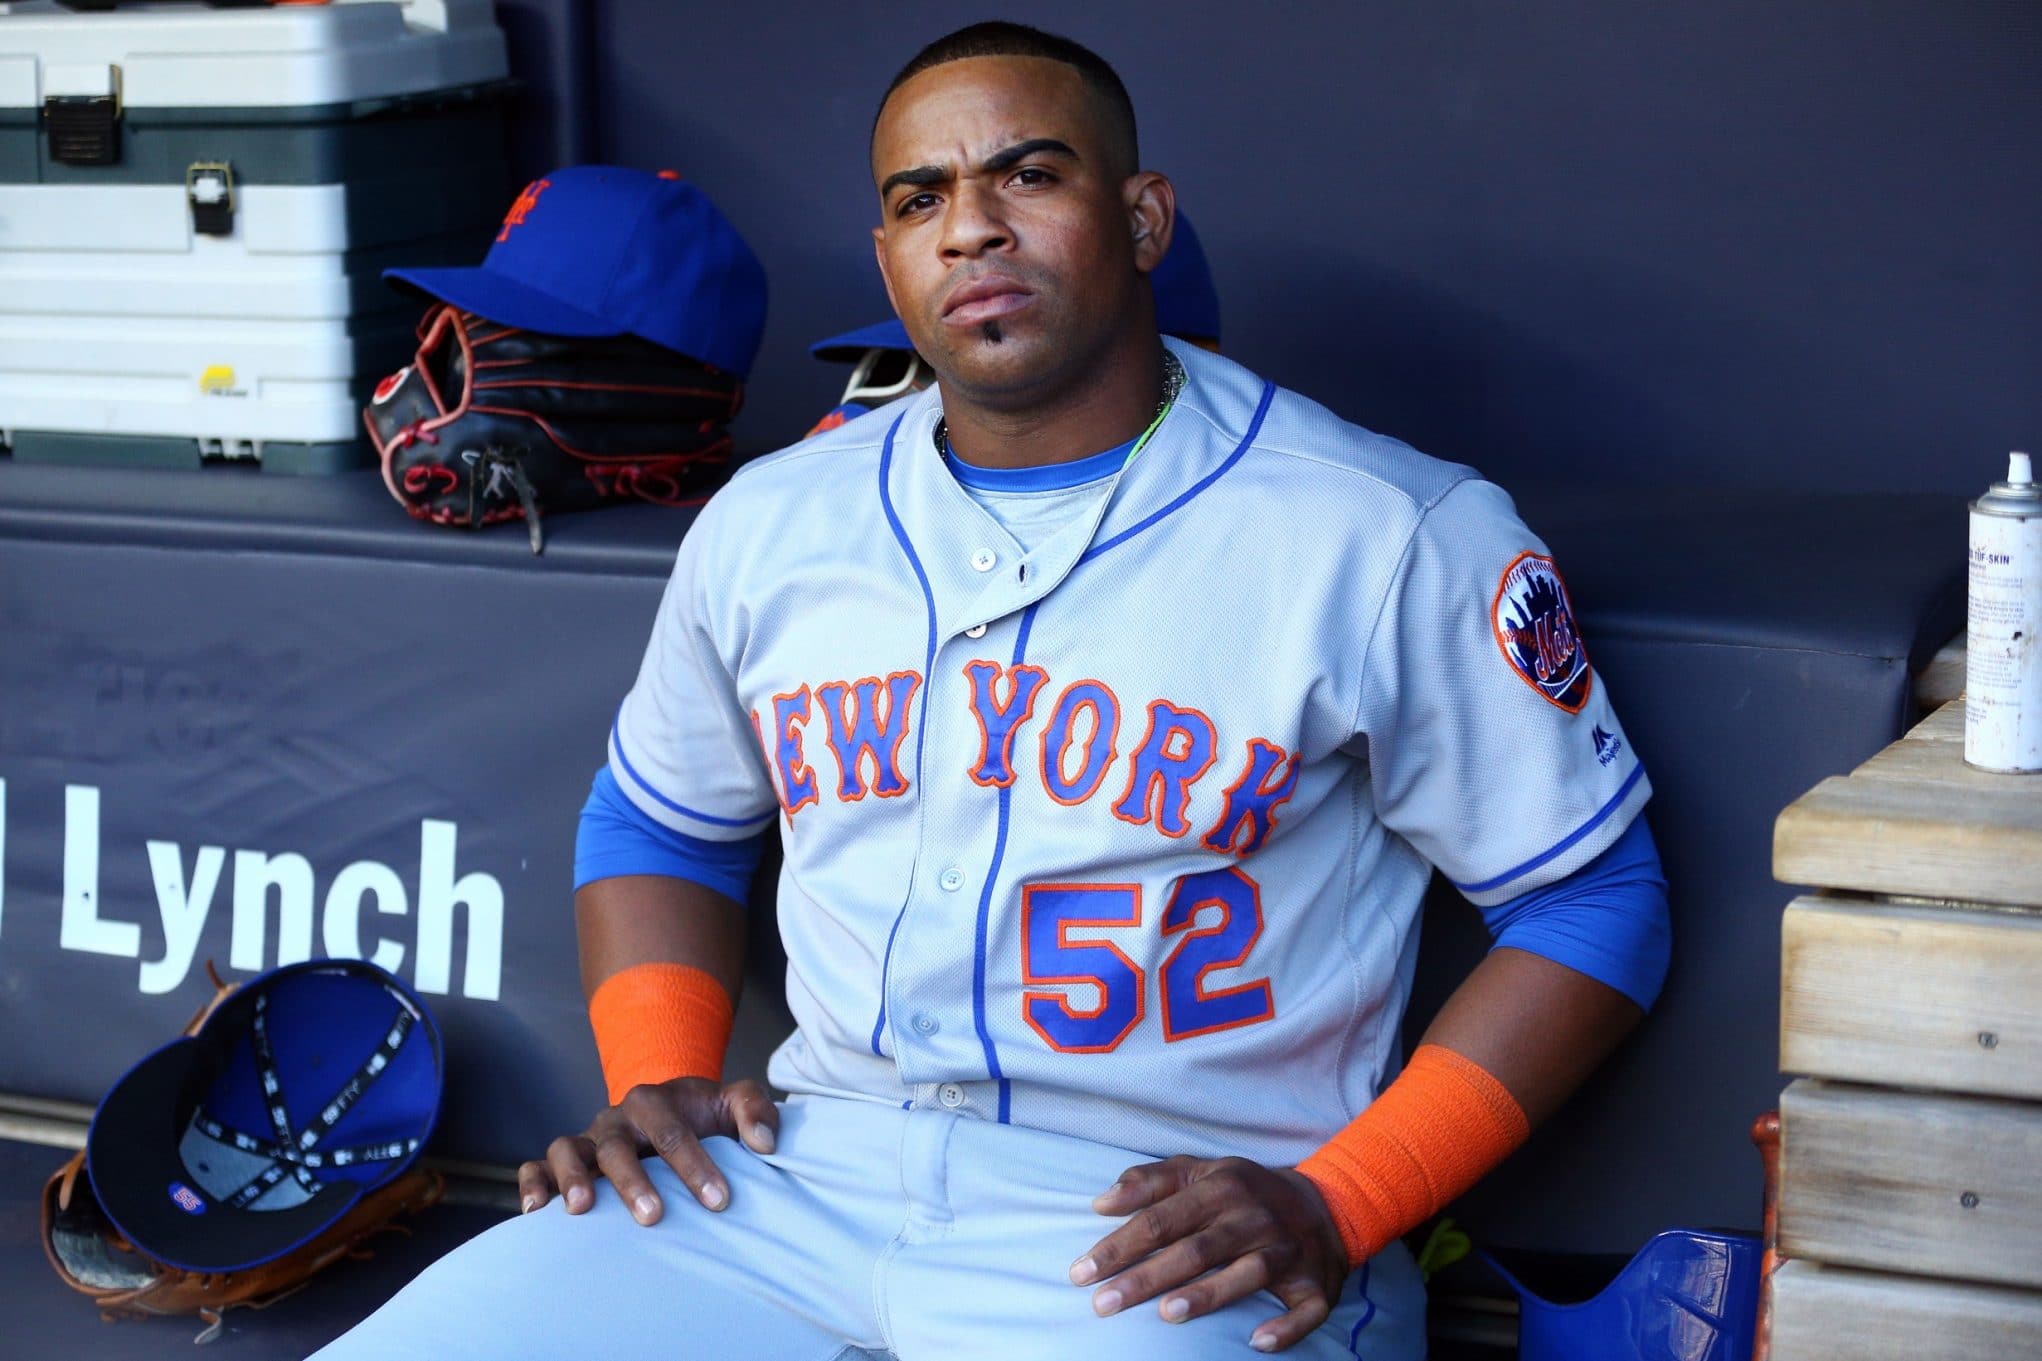 New York Mets: Yoenis Cespedes Placed On 15 Day DL 